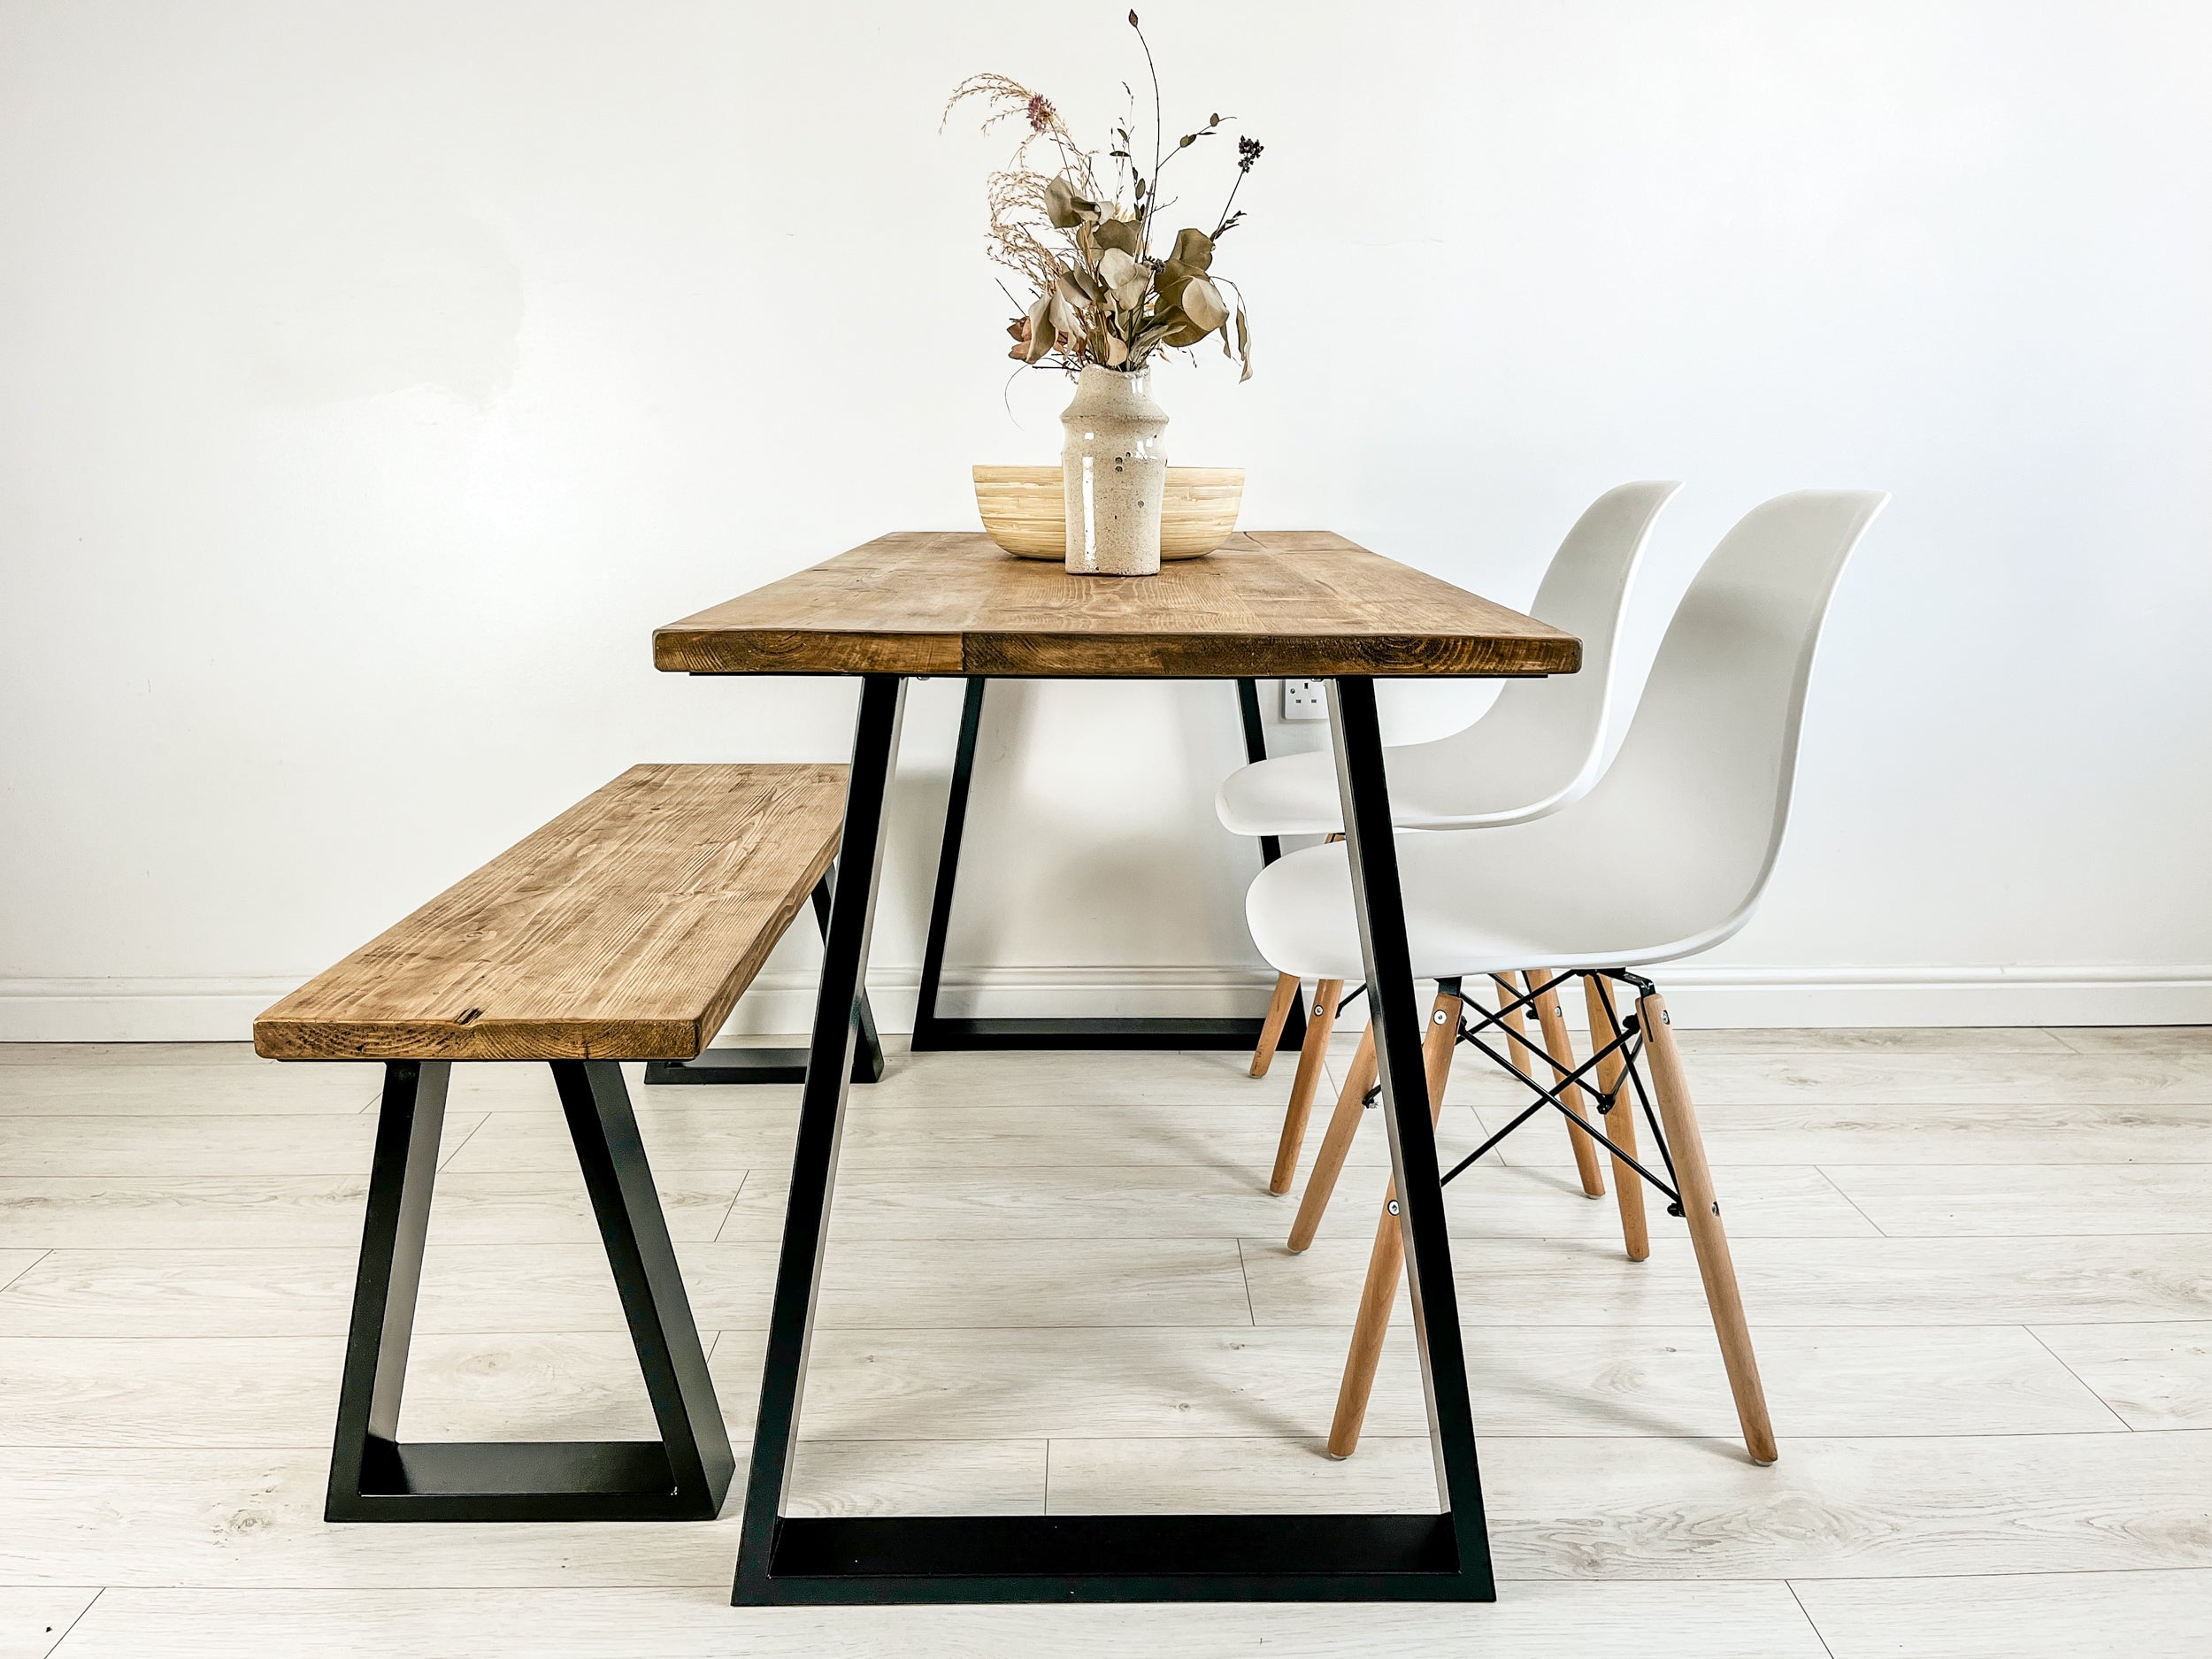 Rustic Wood Dining Table with Trapezium Steel Frame Legs